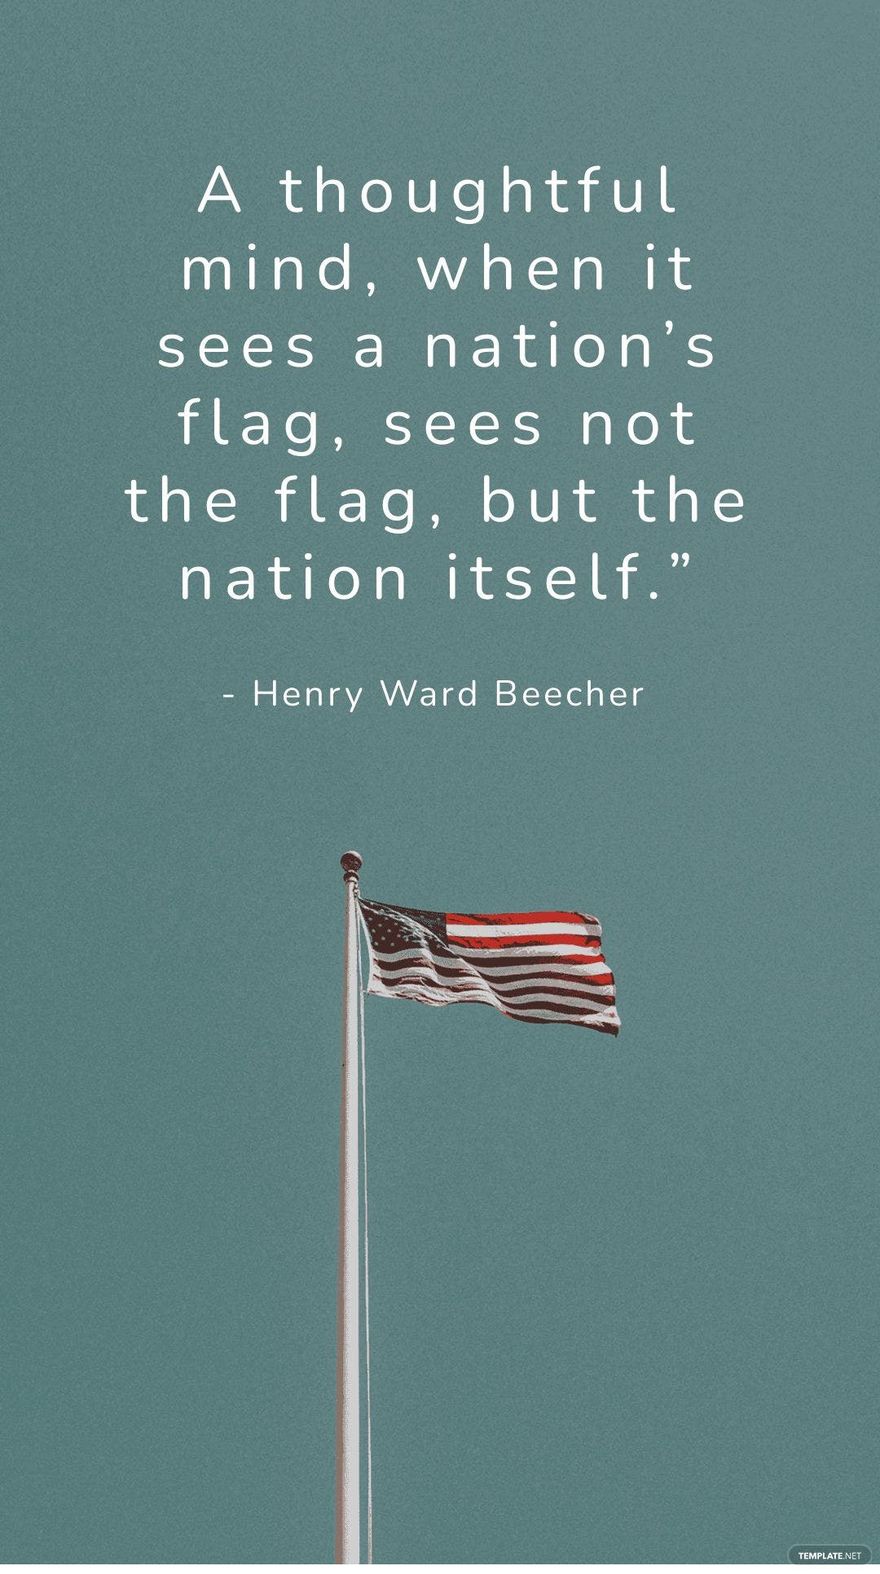 Henry Ward Beecher - A thoughtful mind, when it sees a nation’s flag, sees not the flag, but the nation itself.”